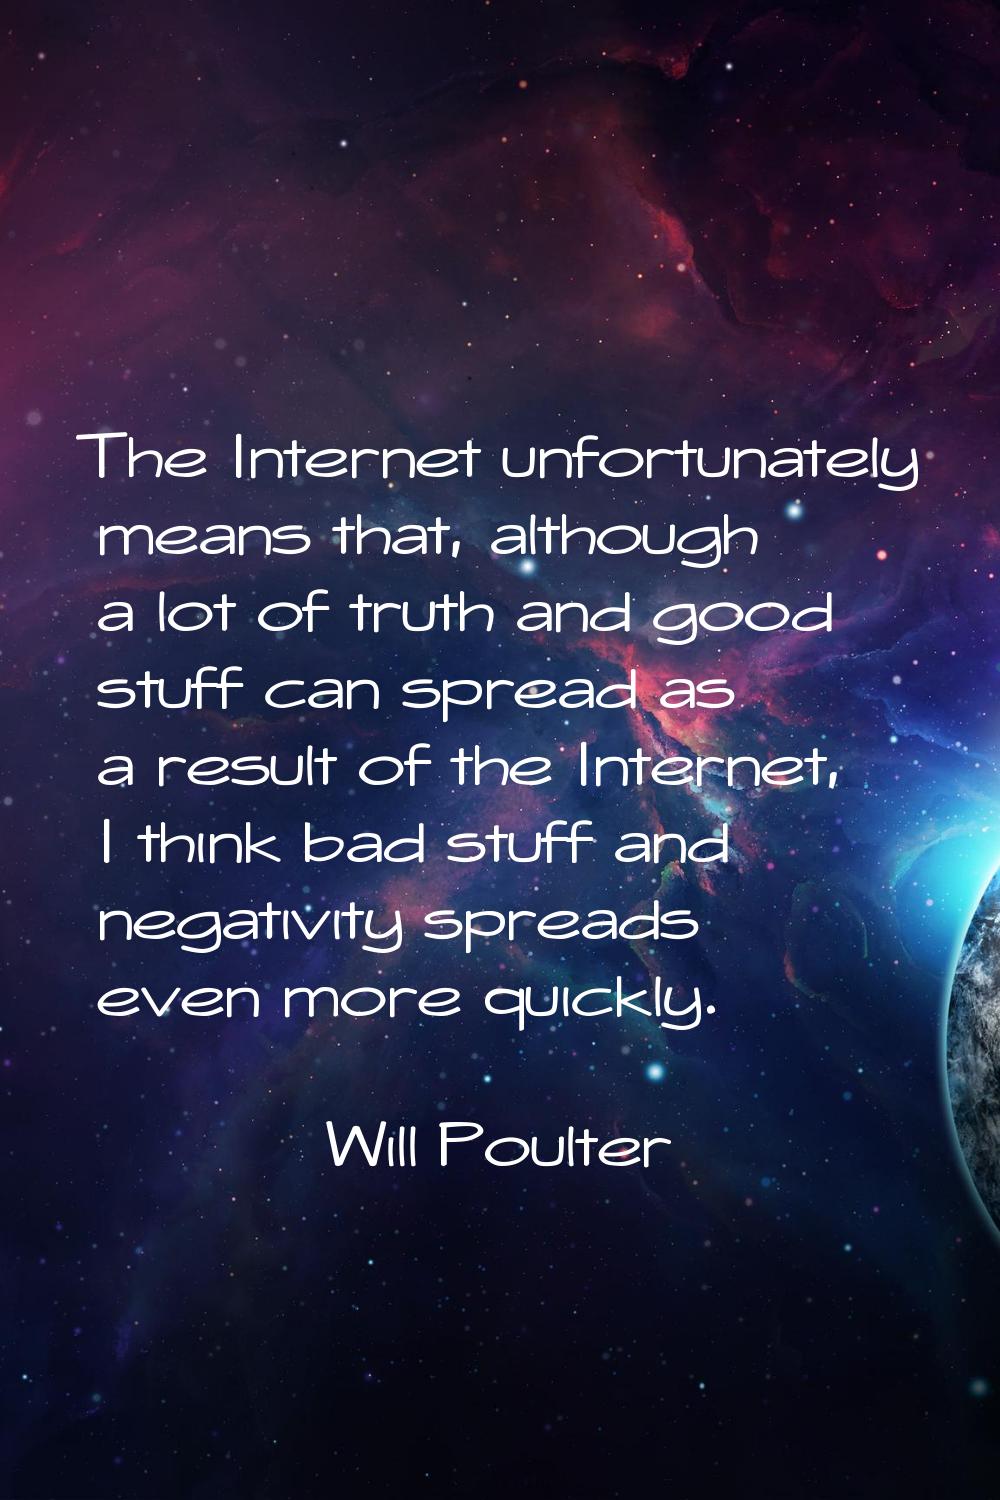 The Internet unfortunately means that, although a lot of truth and good stuff can spread as a resul